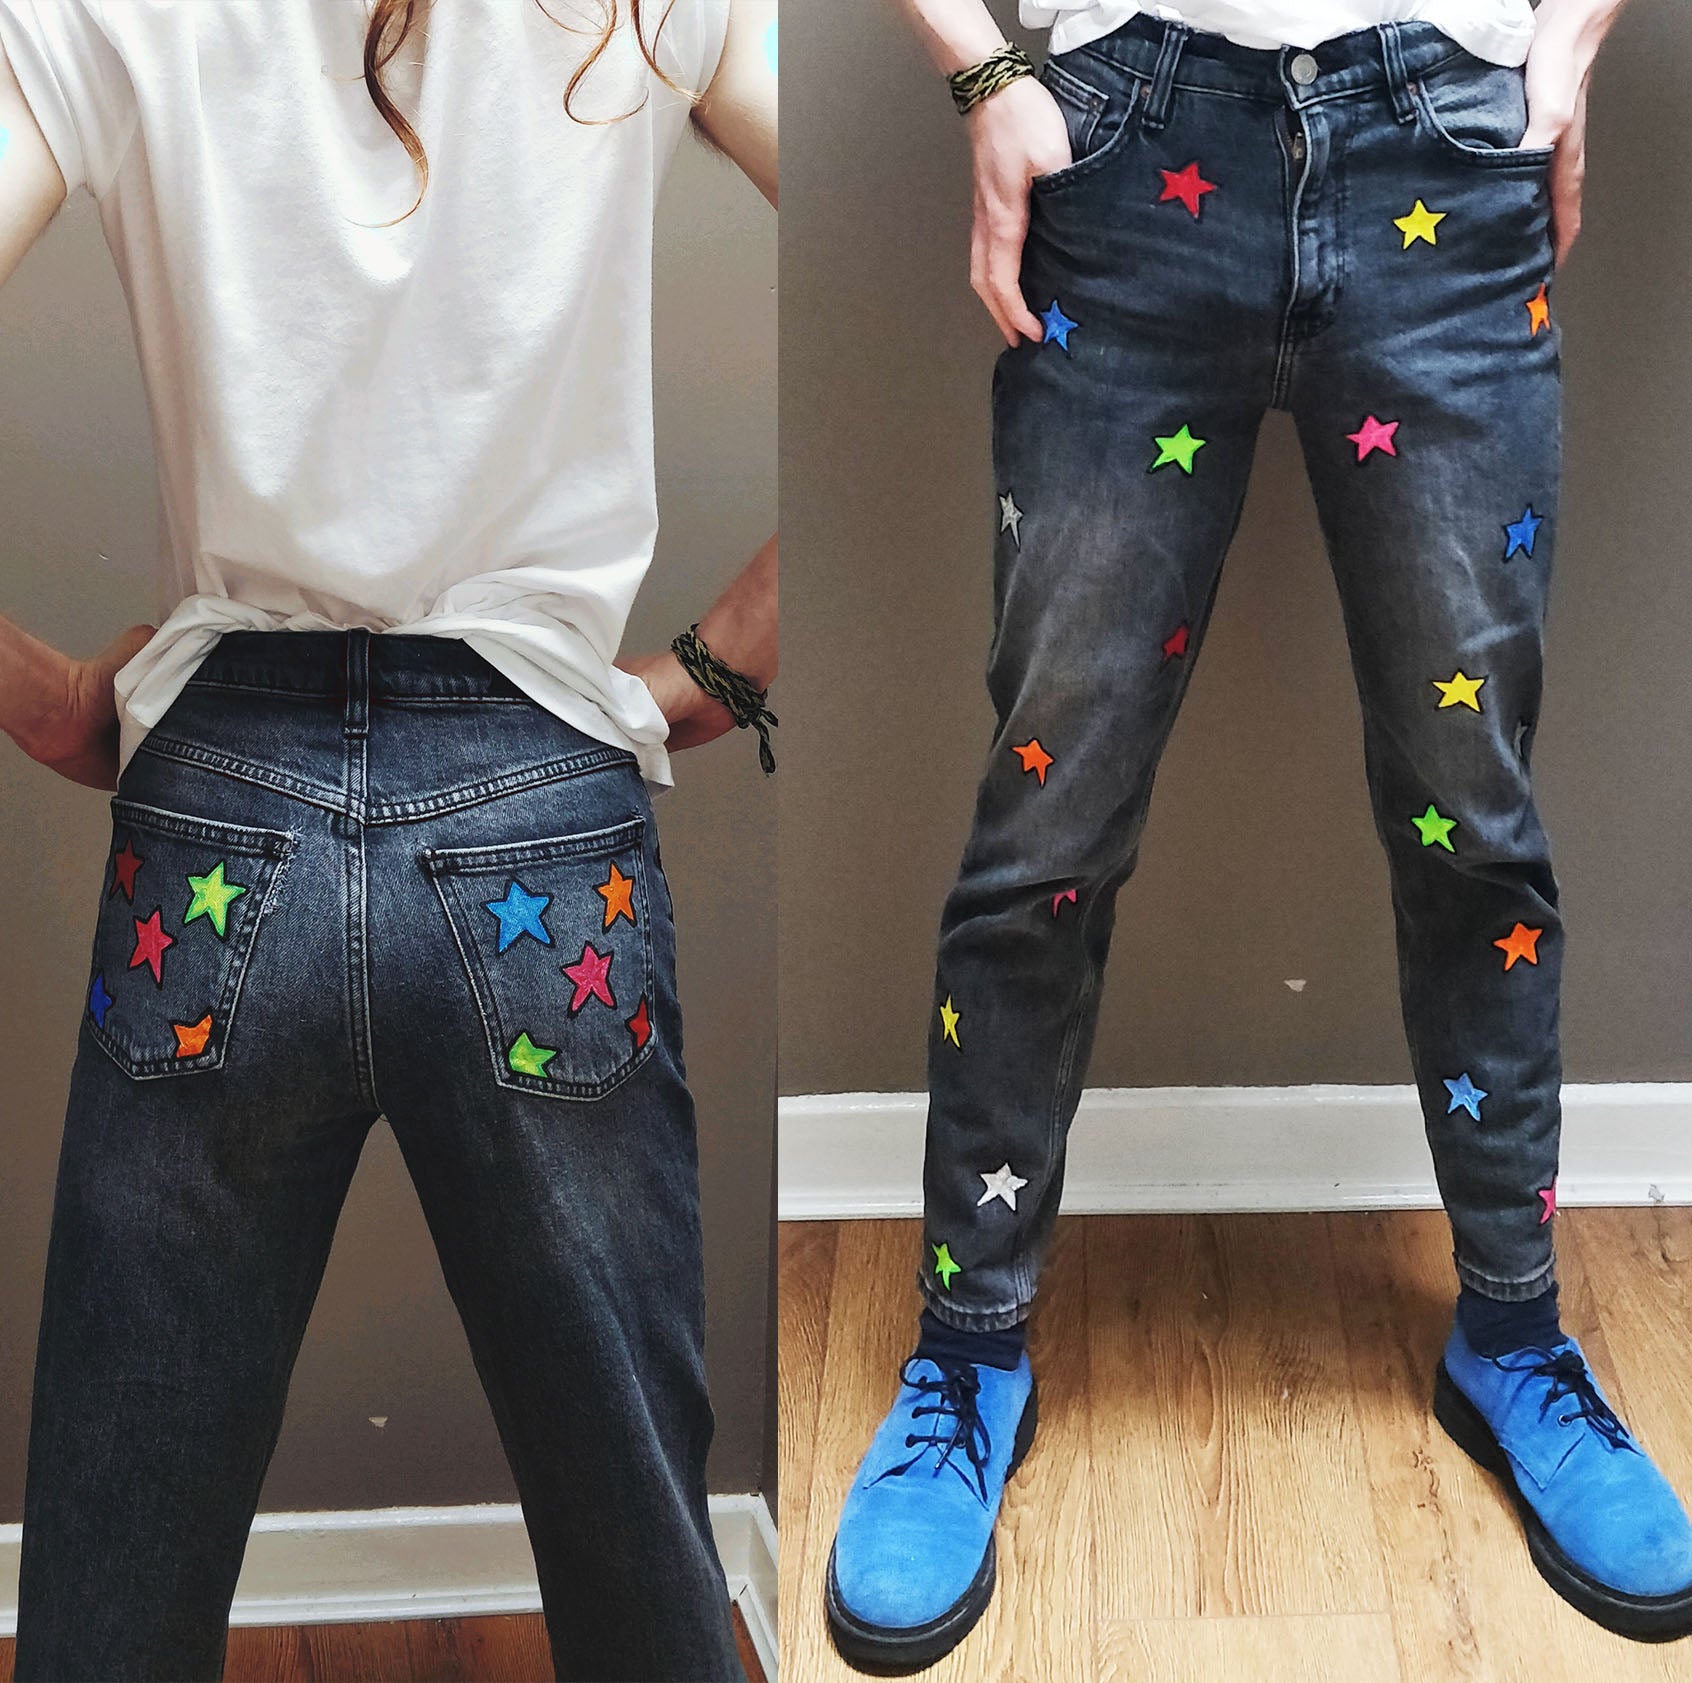 Custom Hand-Painted Denim Jeans (You Supply The Jeans) – Inner